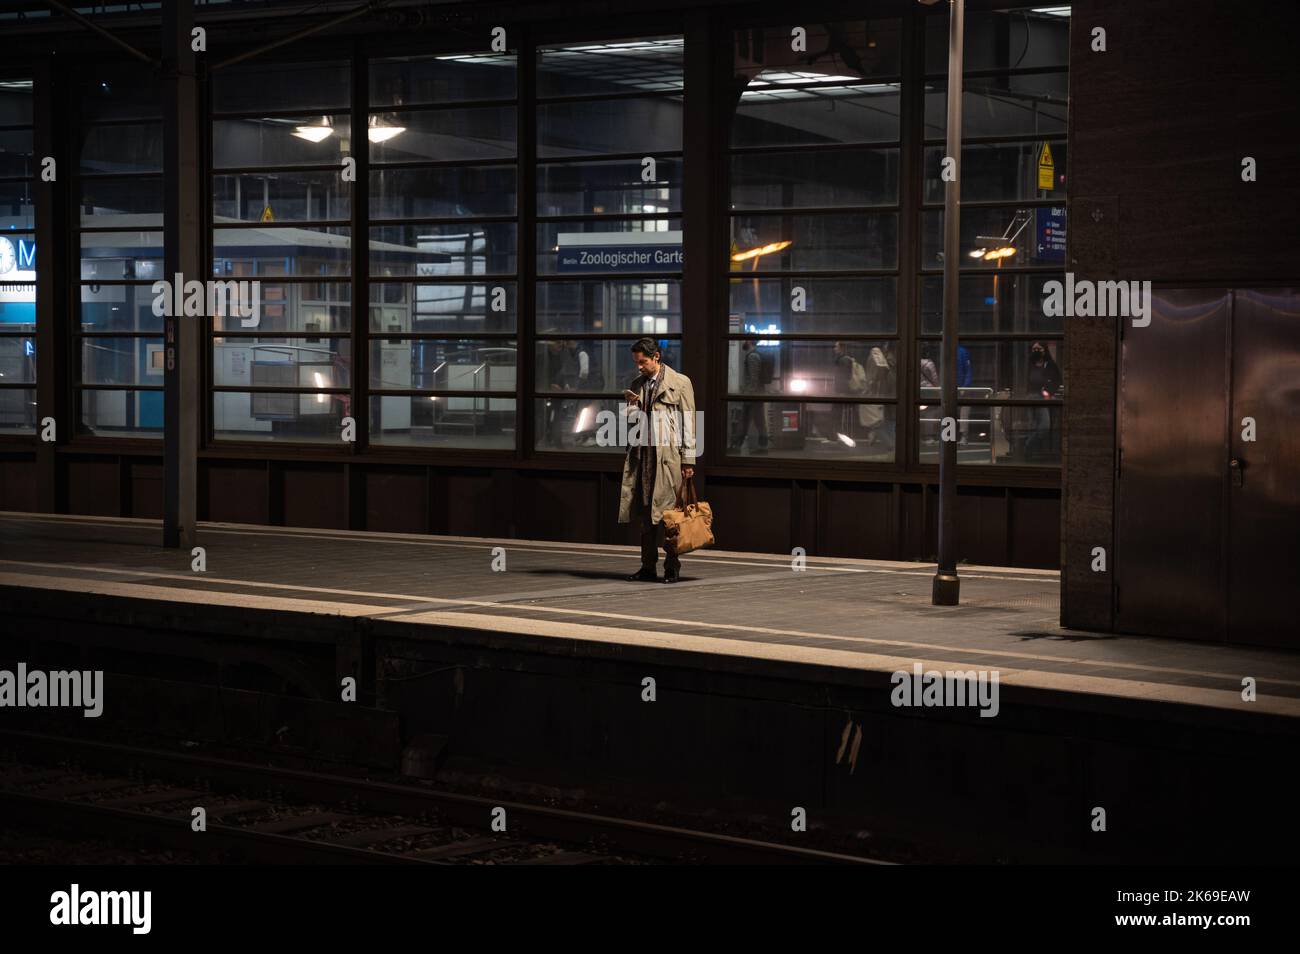 07.10.2022, Berlin, Germany, Europe - A man looks at his mobile phone as he waits for the train on a platform at Bahnhof Zoologischer Garten station. Stock Photo